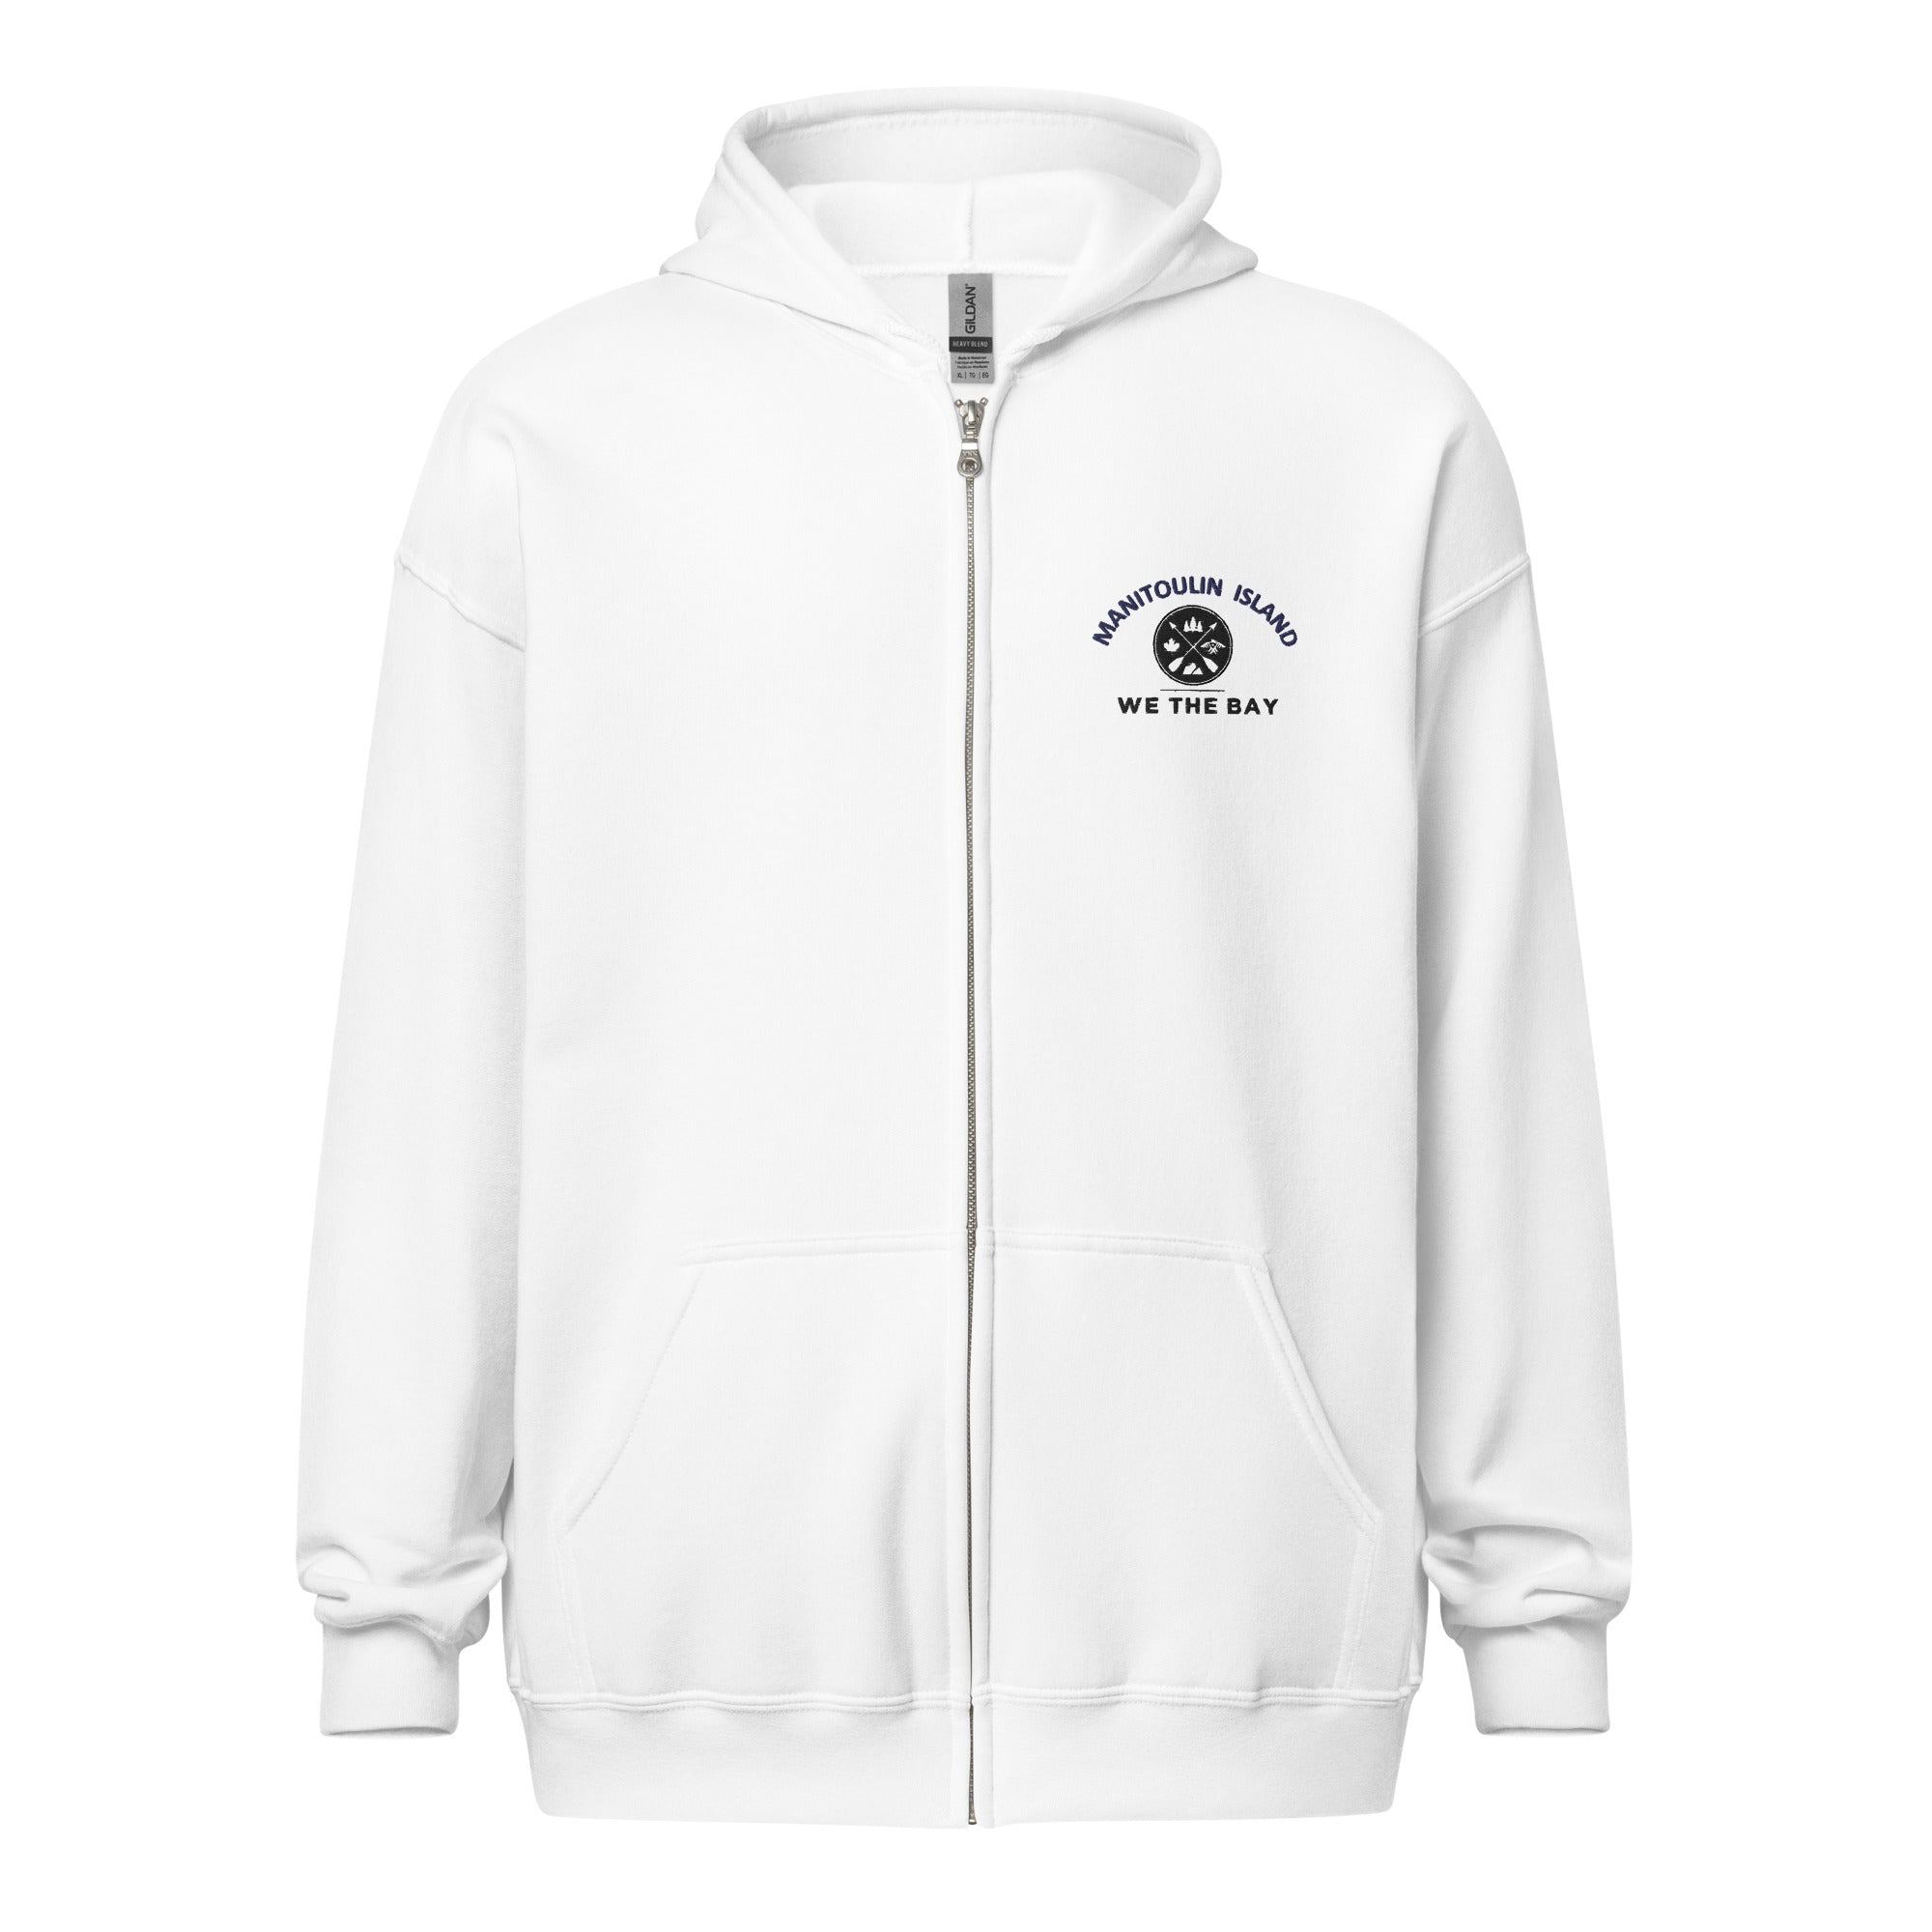 Embroidered Manitoulin Island Zip Hoody